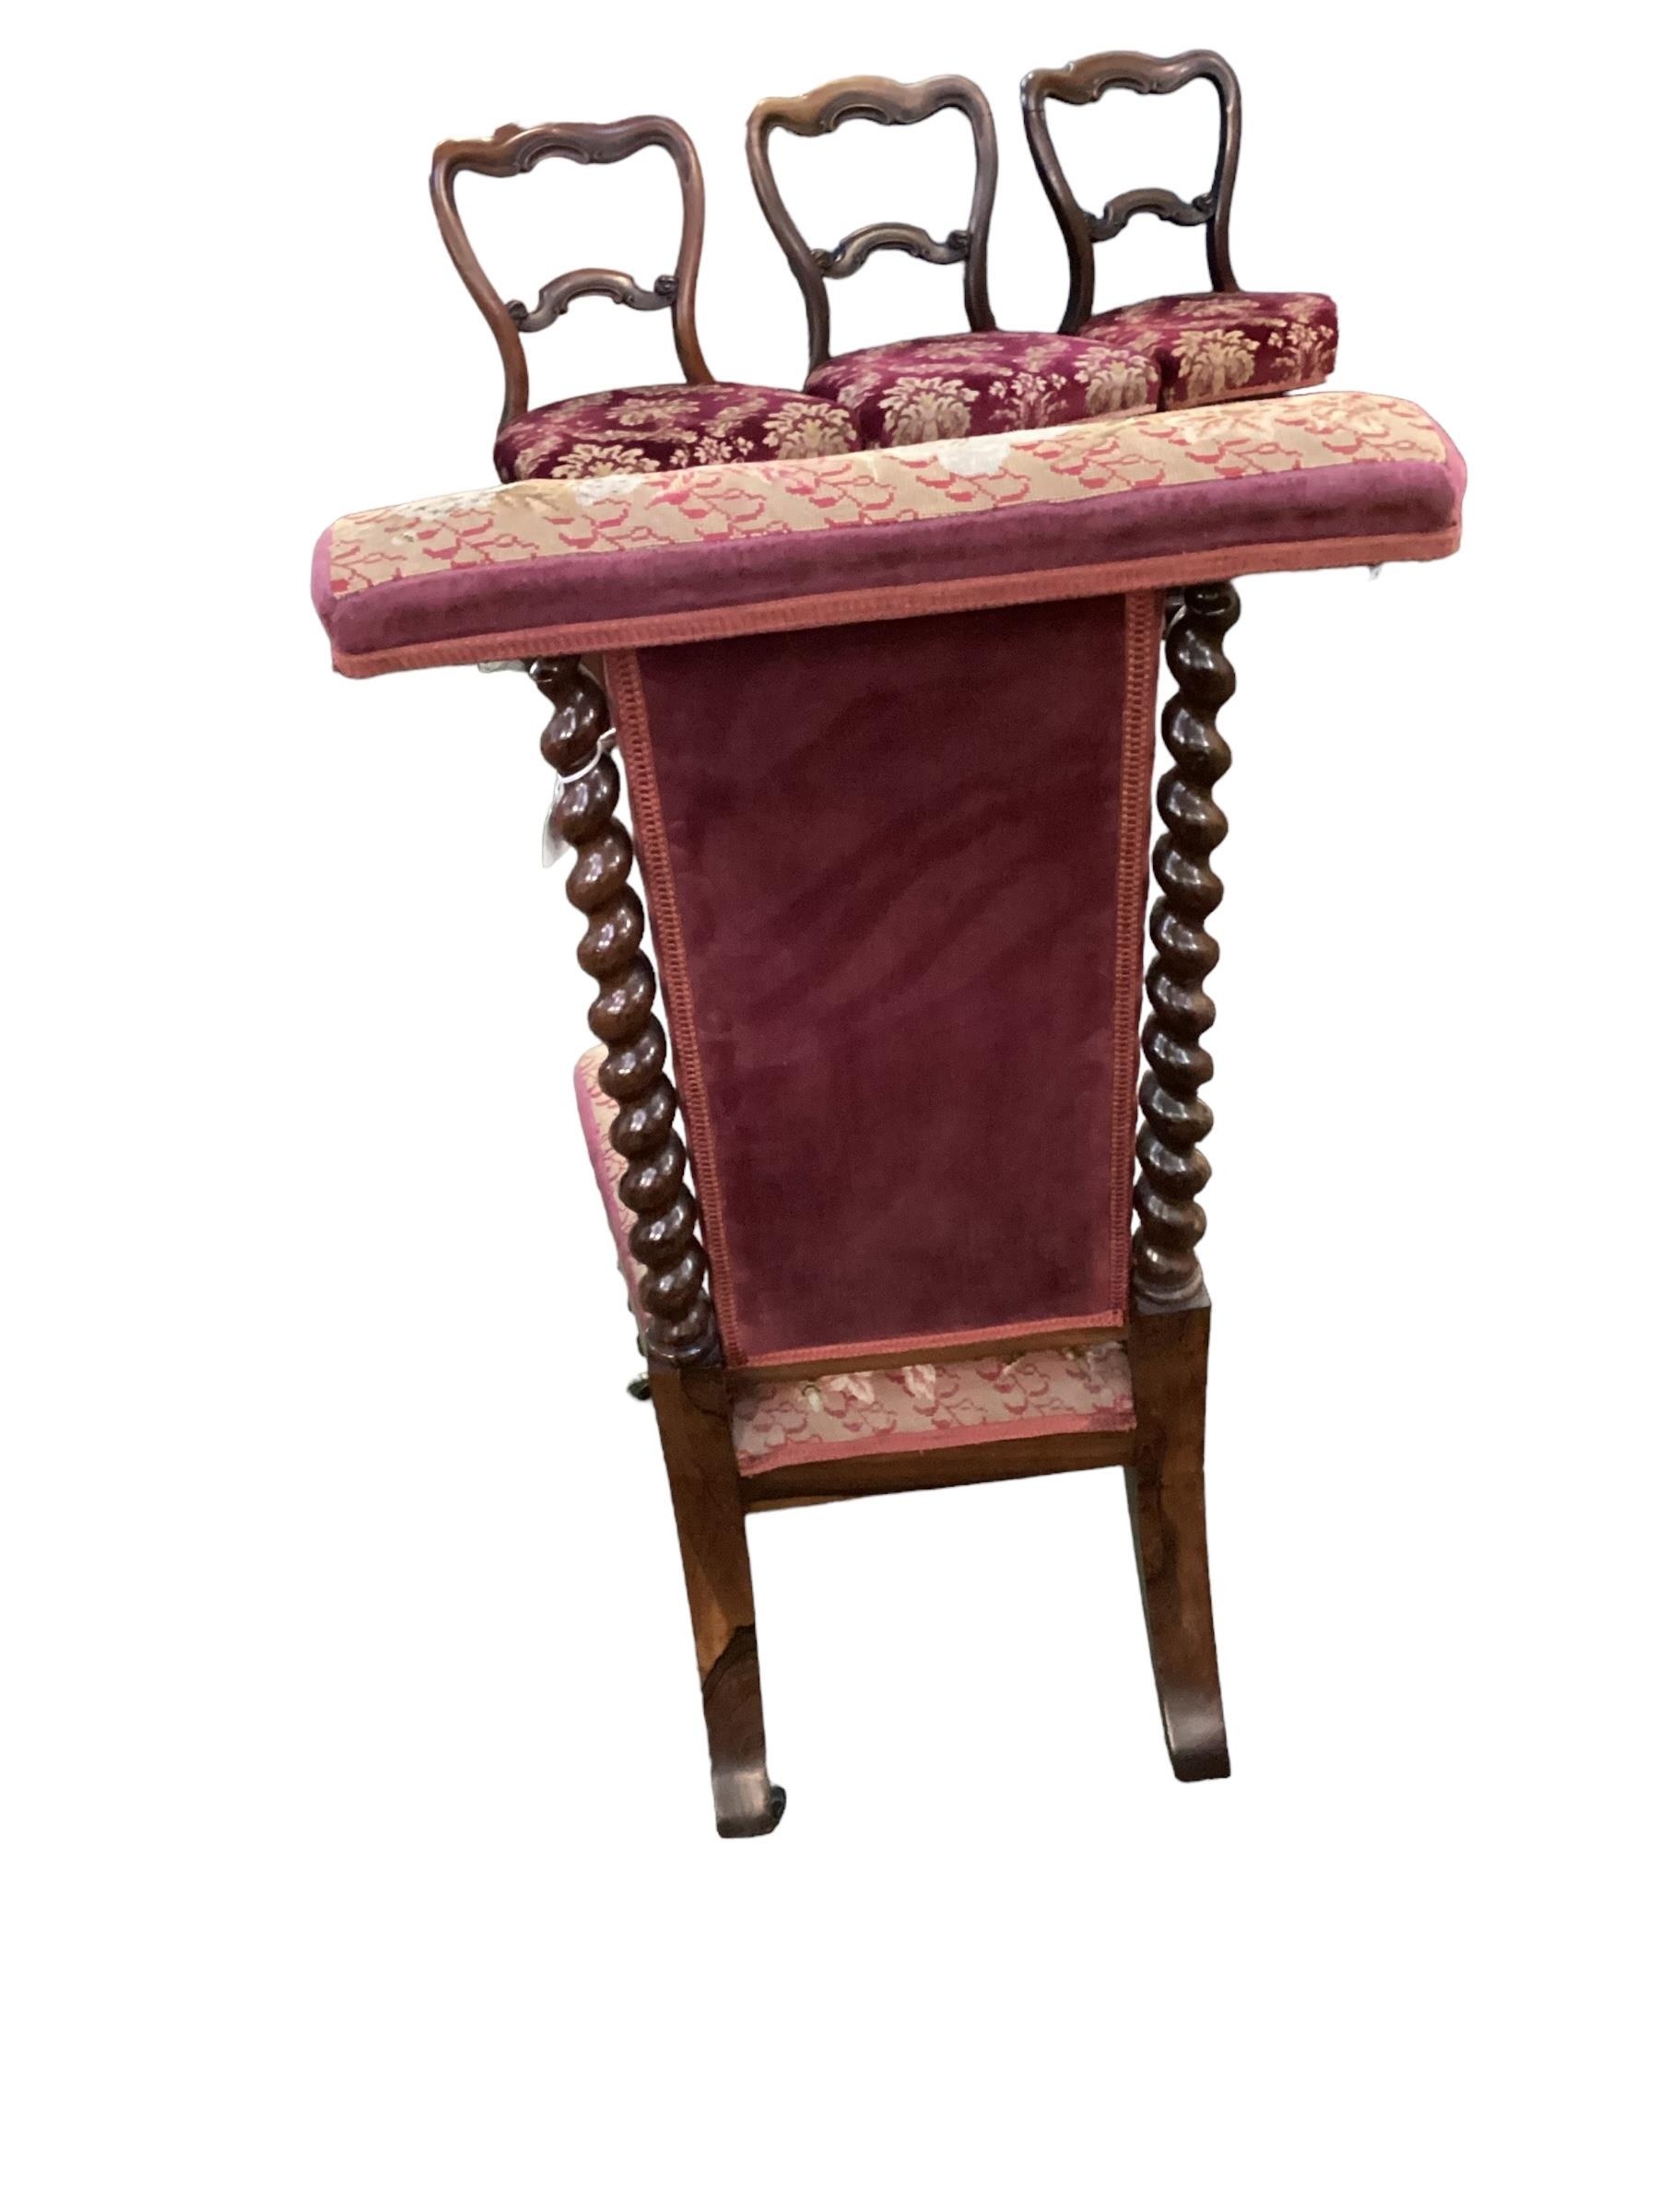 Victorian Prie Dieu chair with tapestry upholstery and barley twist sides; and Prie Dieu chair - Image 11 of 14